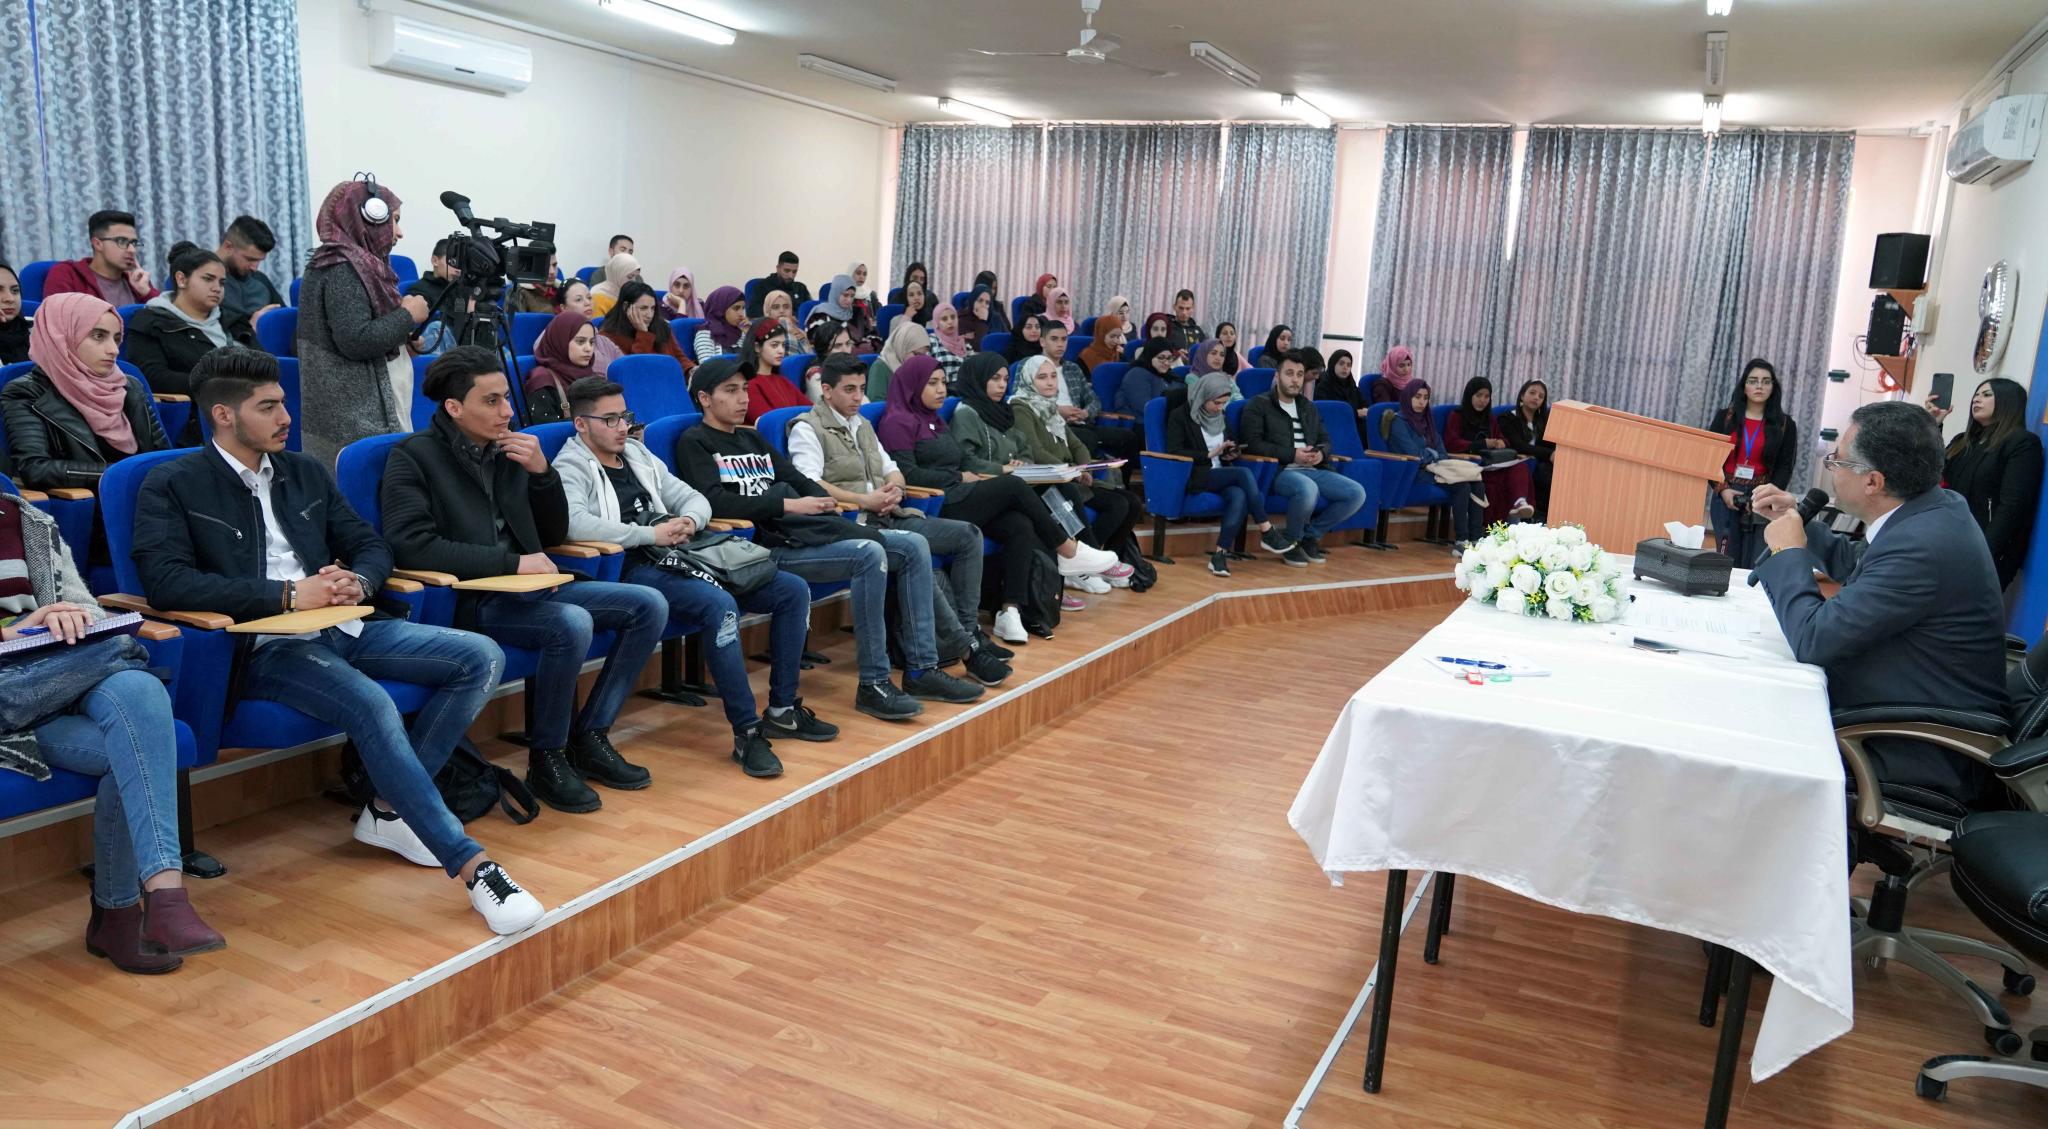 The Anniversary of the Poet Darwish, the university organizes an open culture day entitled “Almond Blossoms and Beyond”